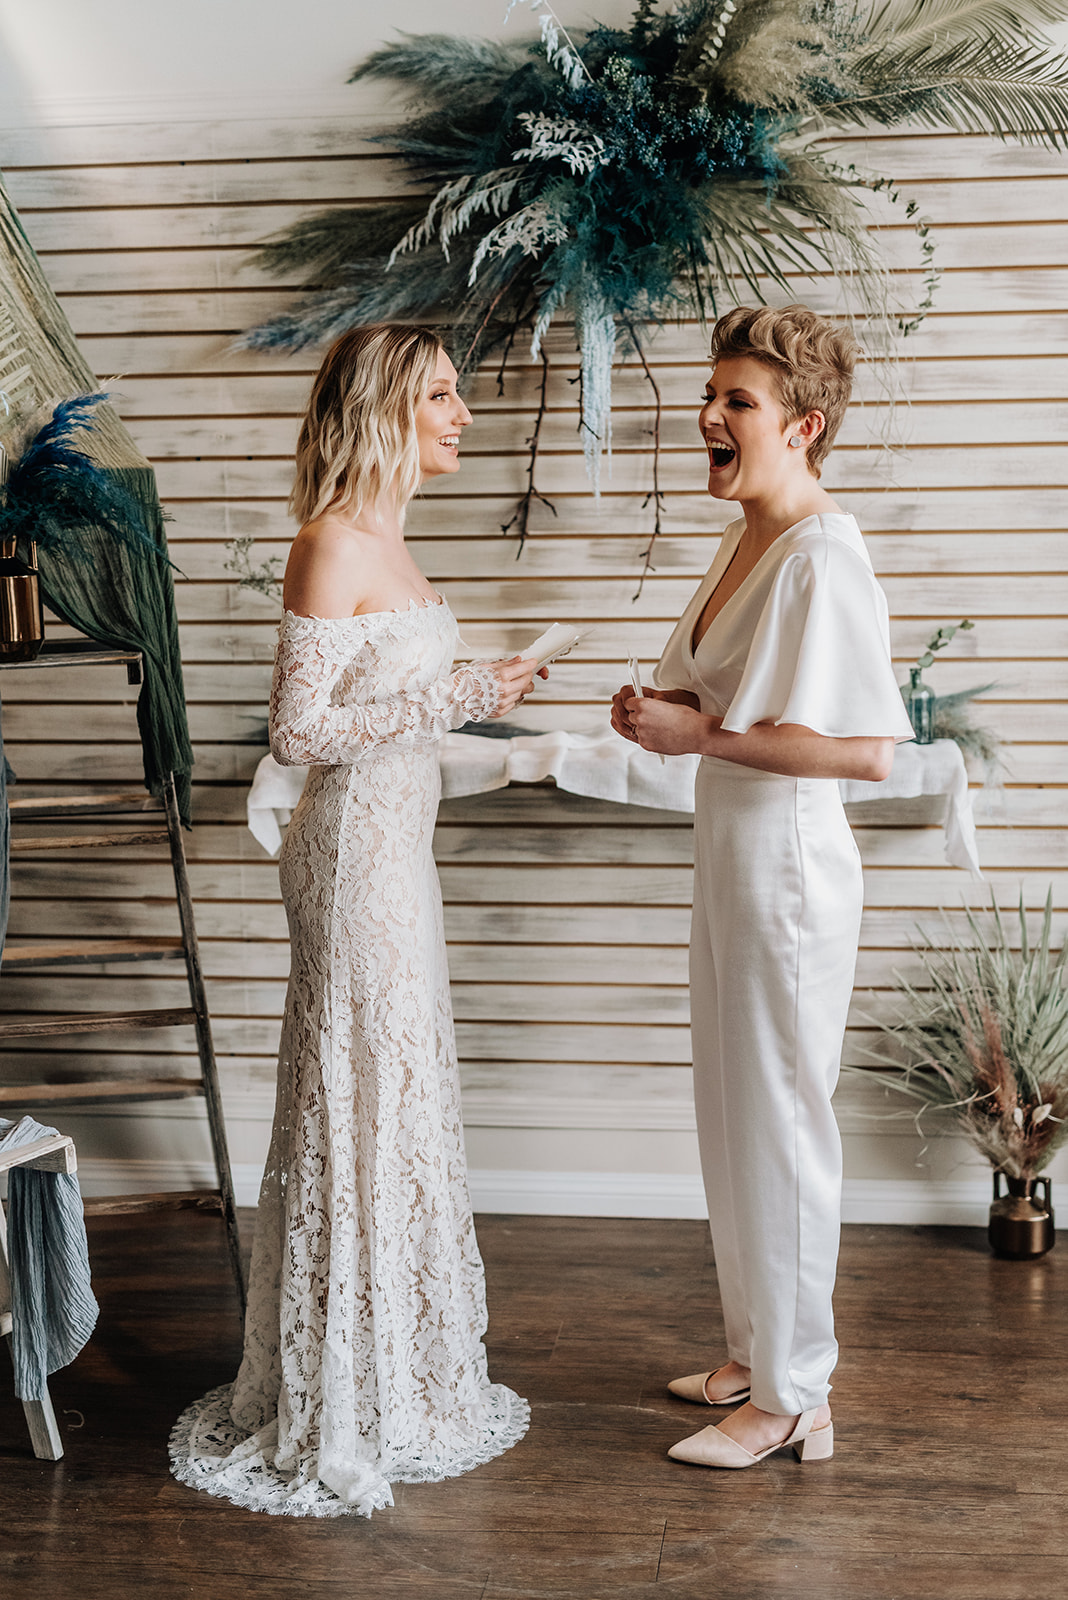 Brides laugh as they share their vows in front of their bohemian blue ceremony decor